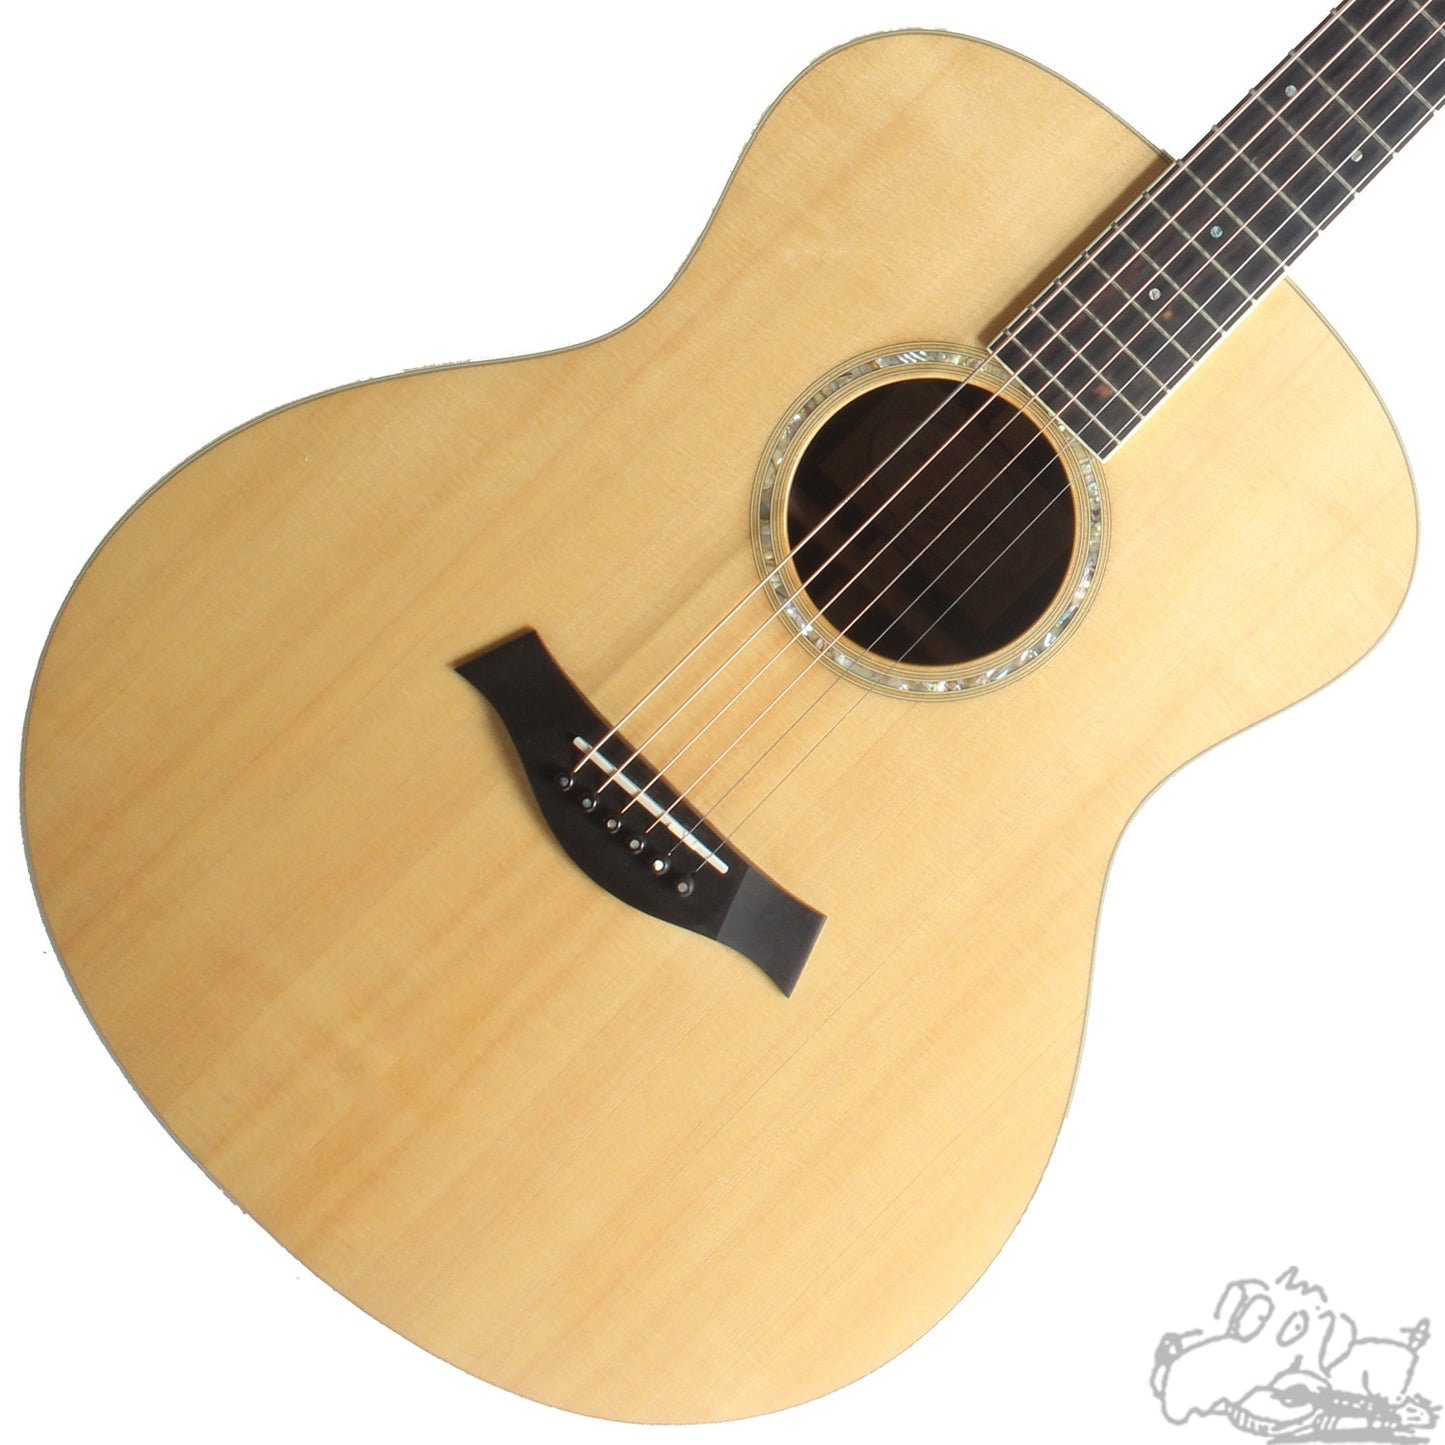 2009 Taylor GS-8